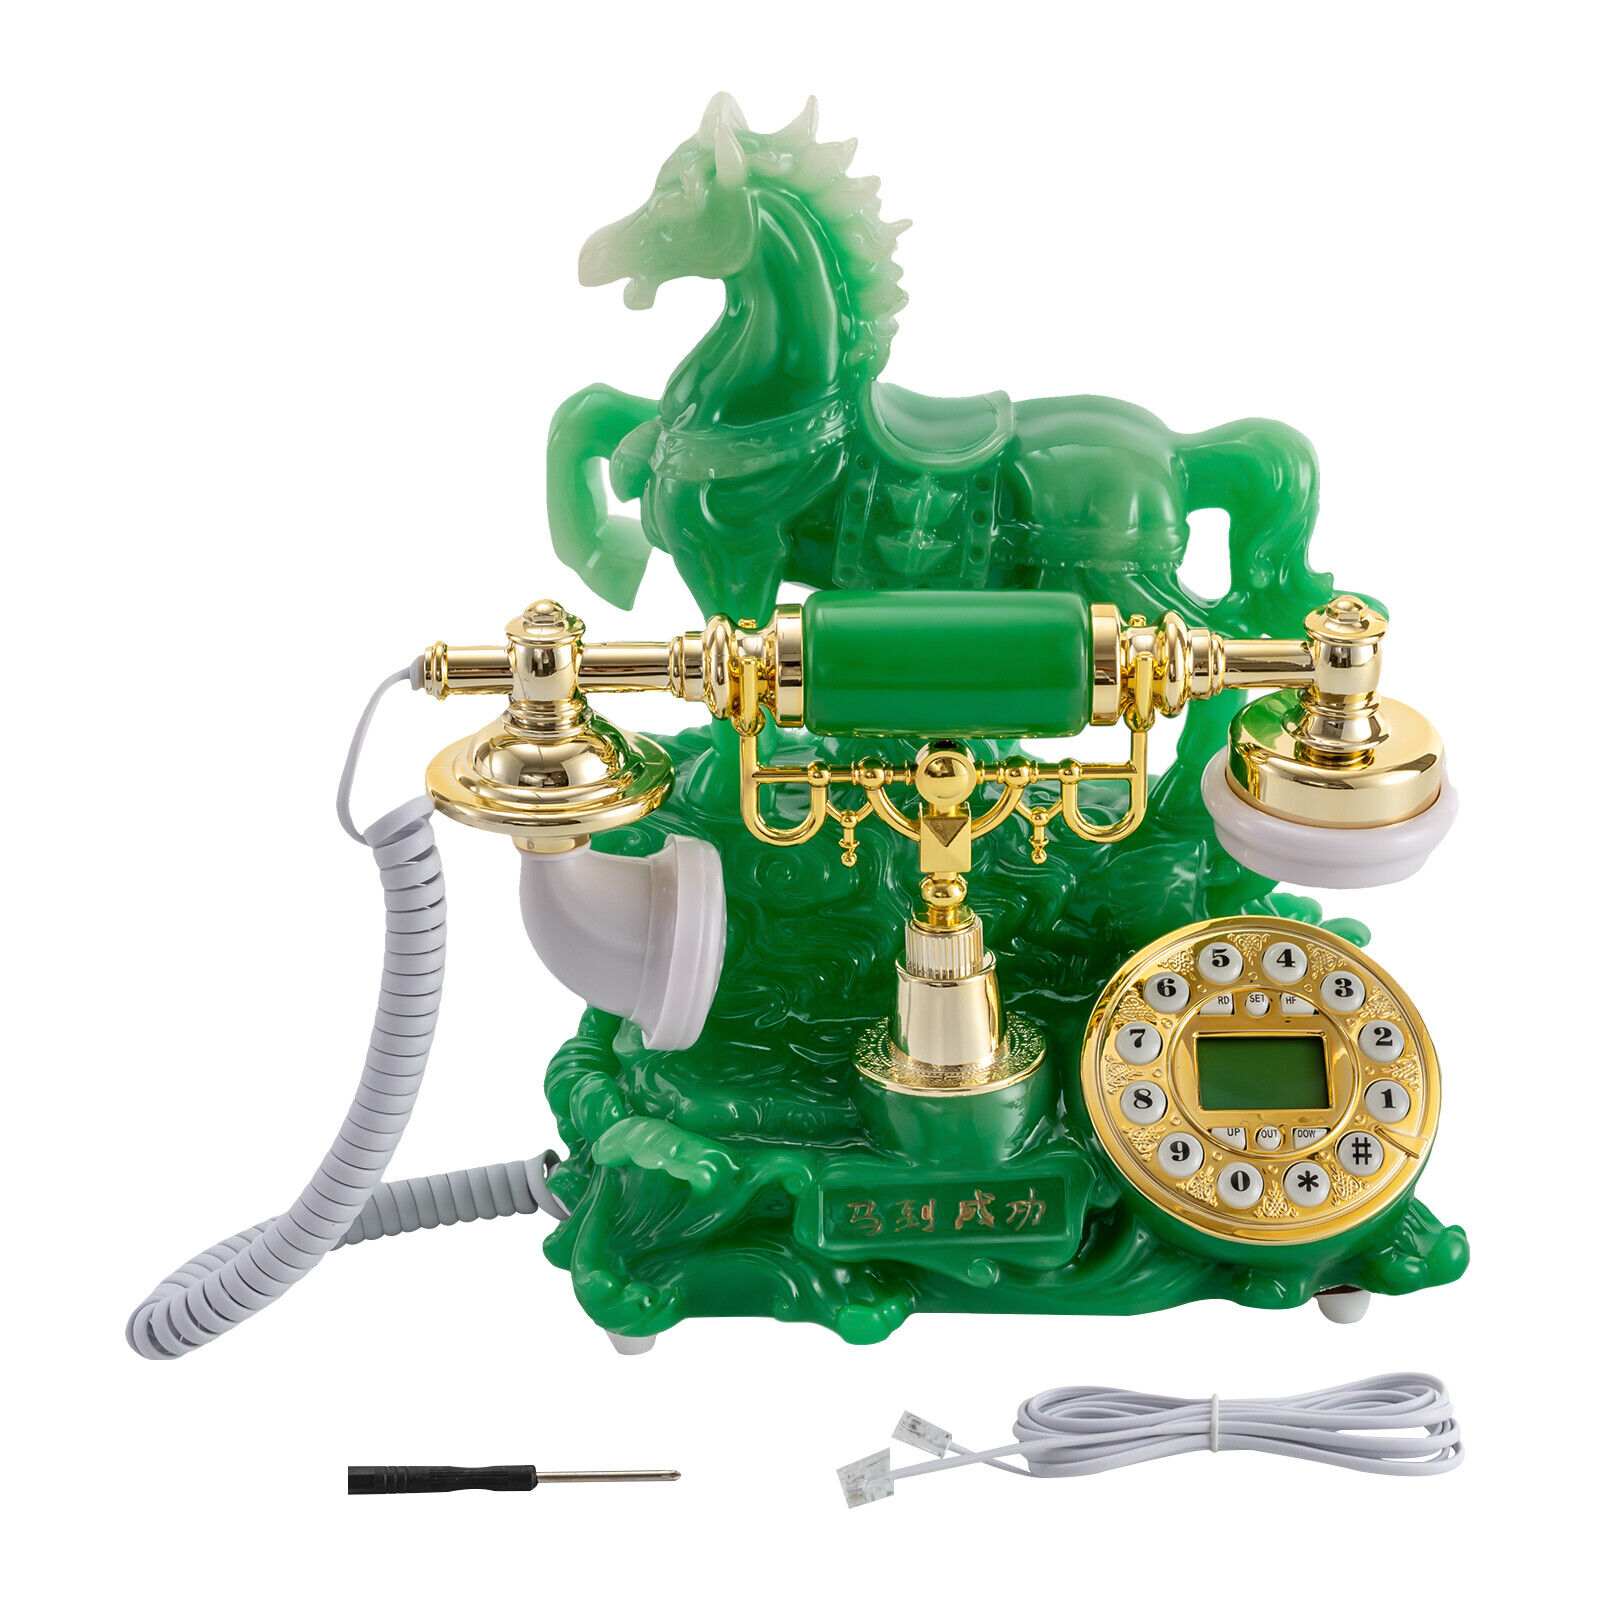 Retro Horse Design Telephone Dial Corded Phone Exquisite Workmanship Green Unbranded Does not apply - фотография #8